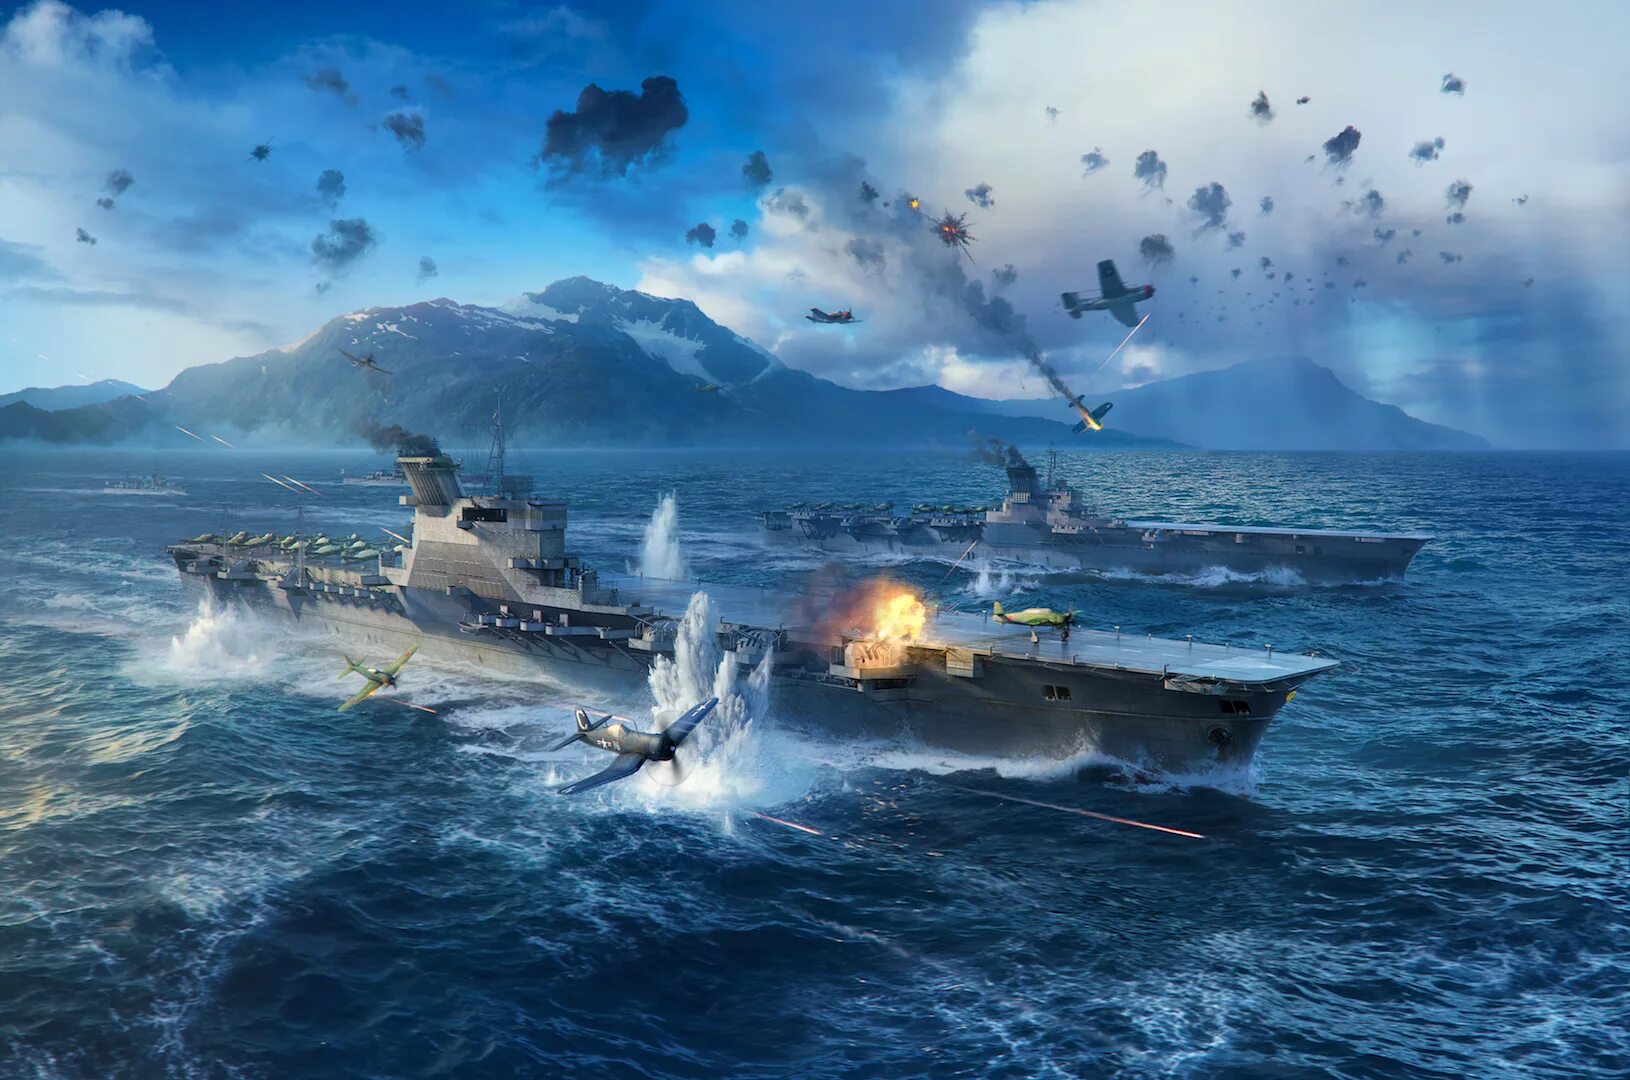 World of Warships авианосцы. World of Warships корабли авианосцы. Морской бой World of Warships. World of Warships aircraft Carrier.